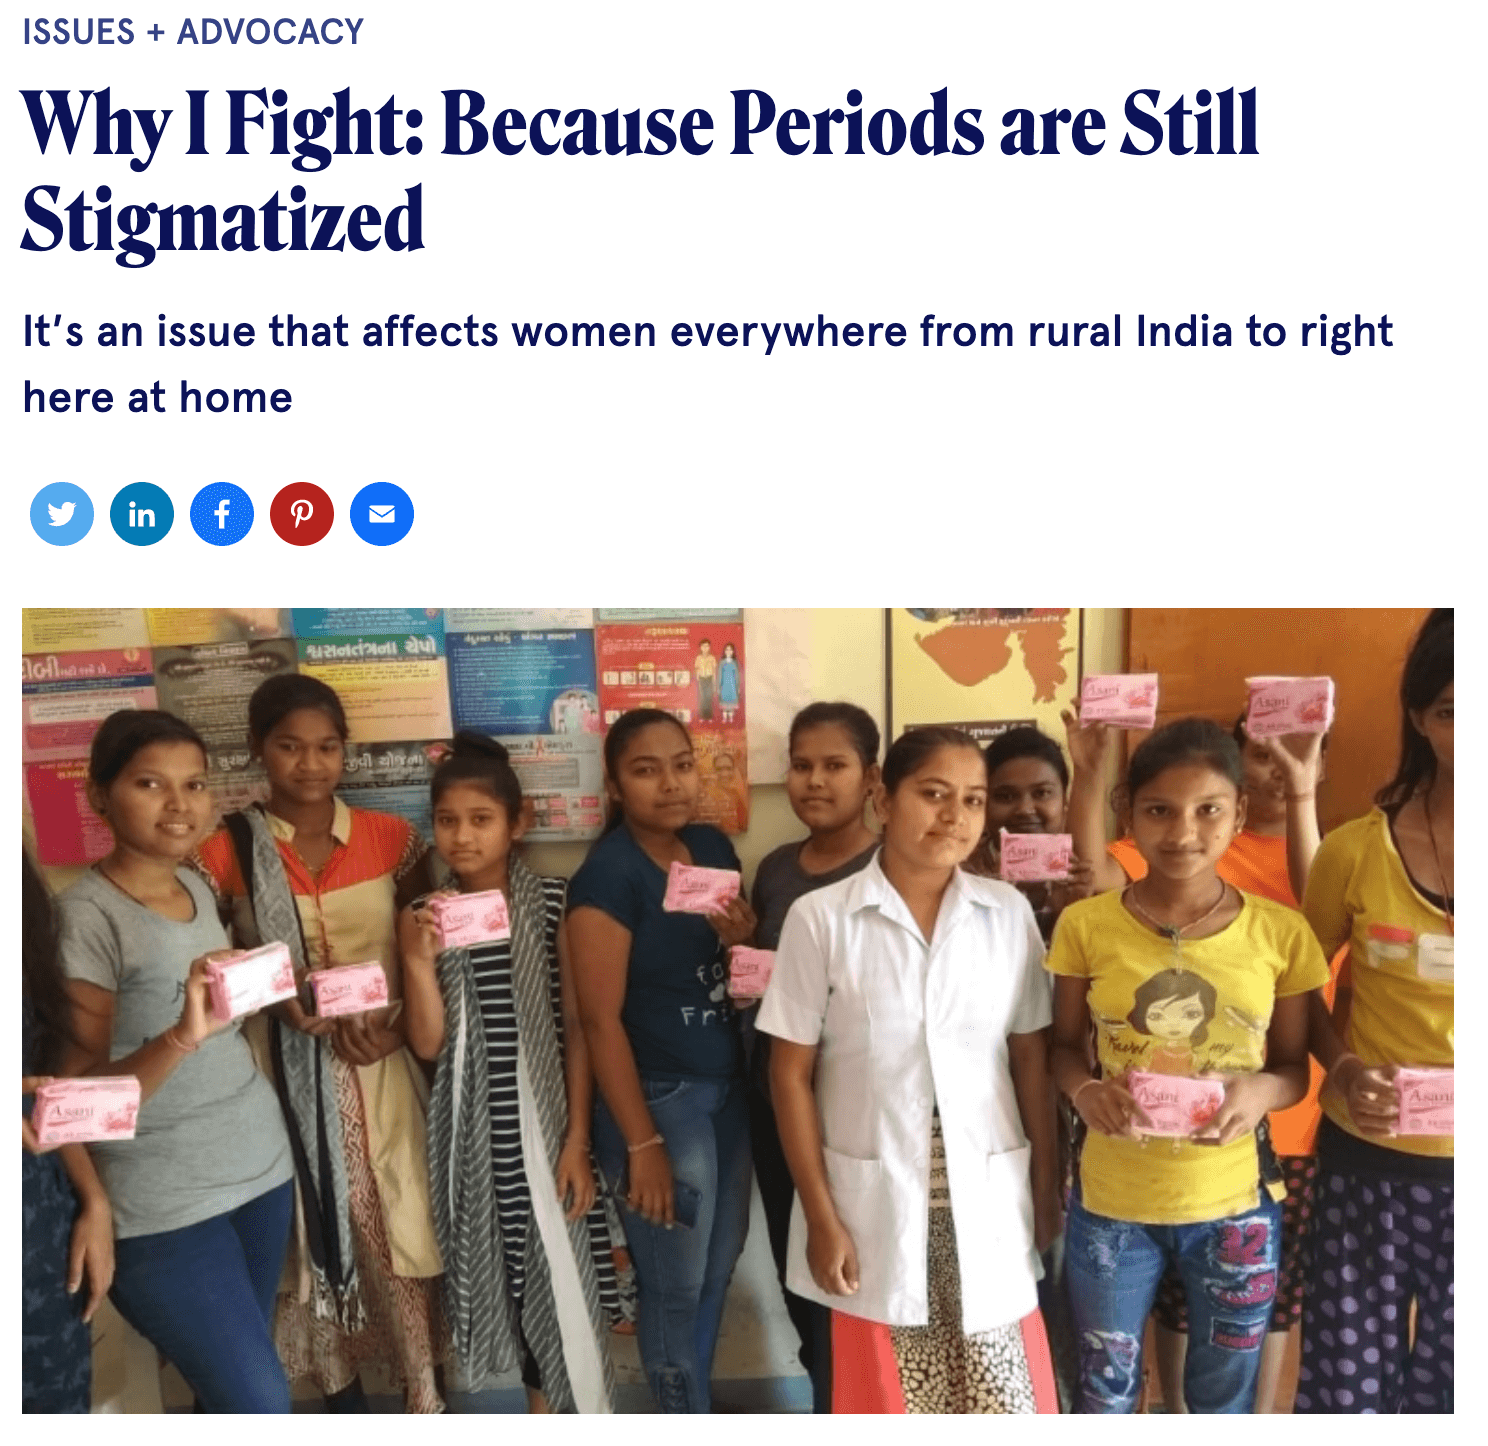 Why I Fight: Because Periods Are Stigmatized